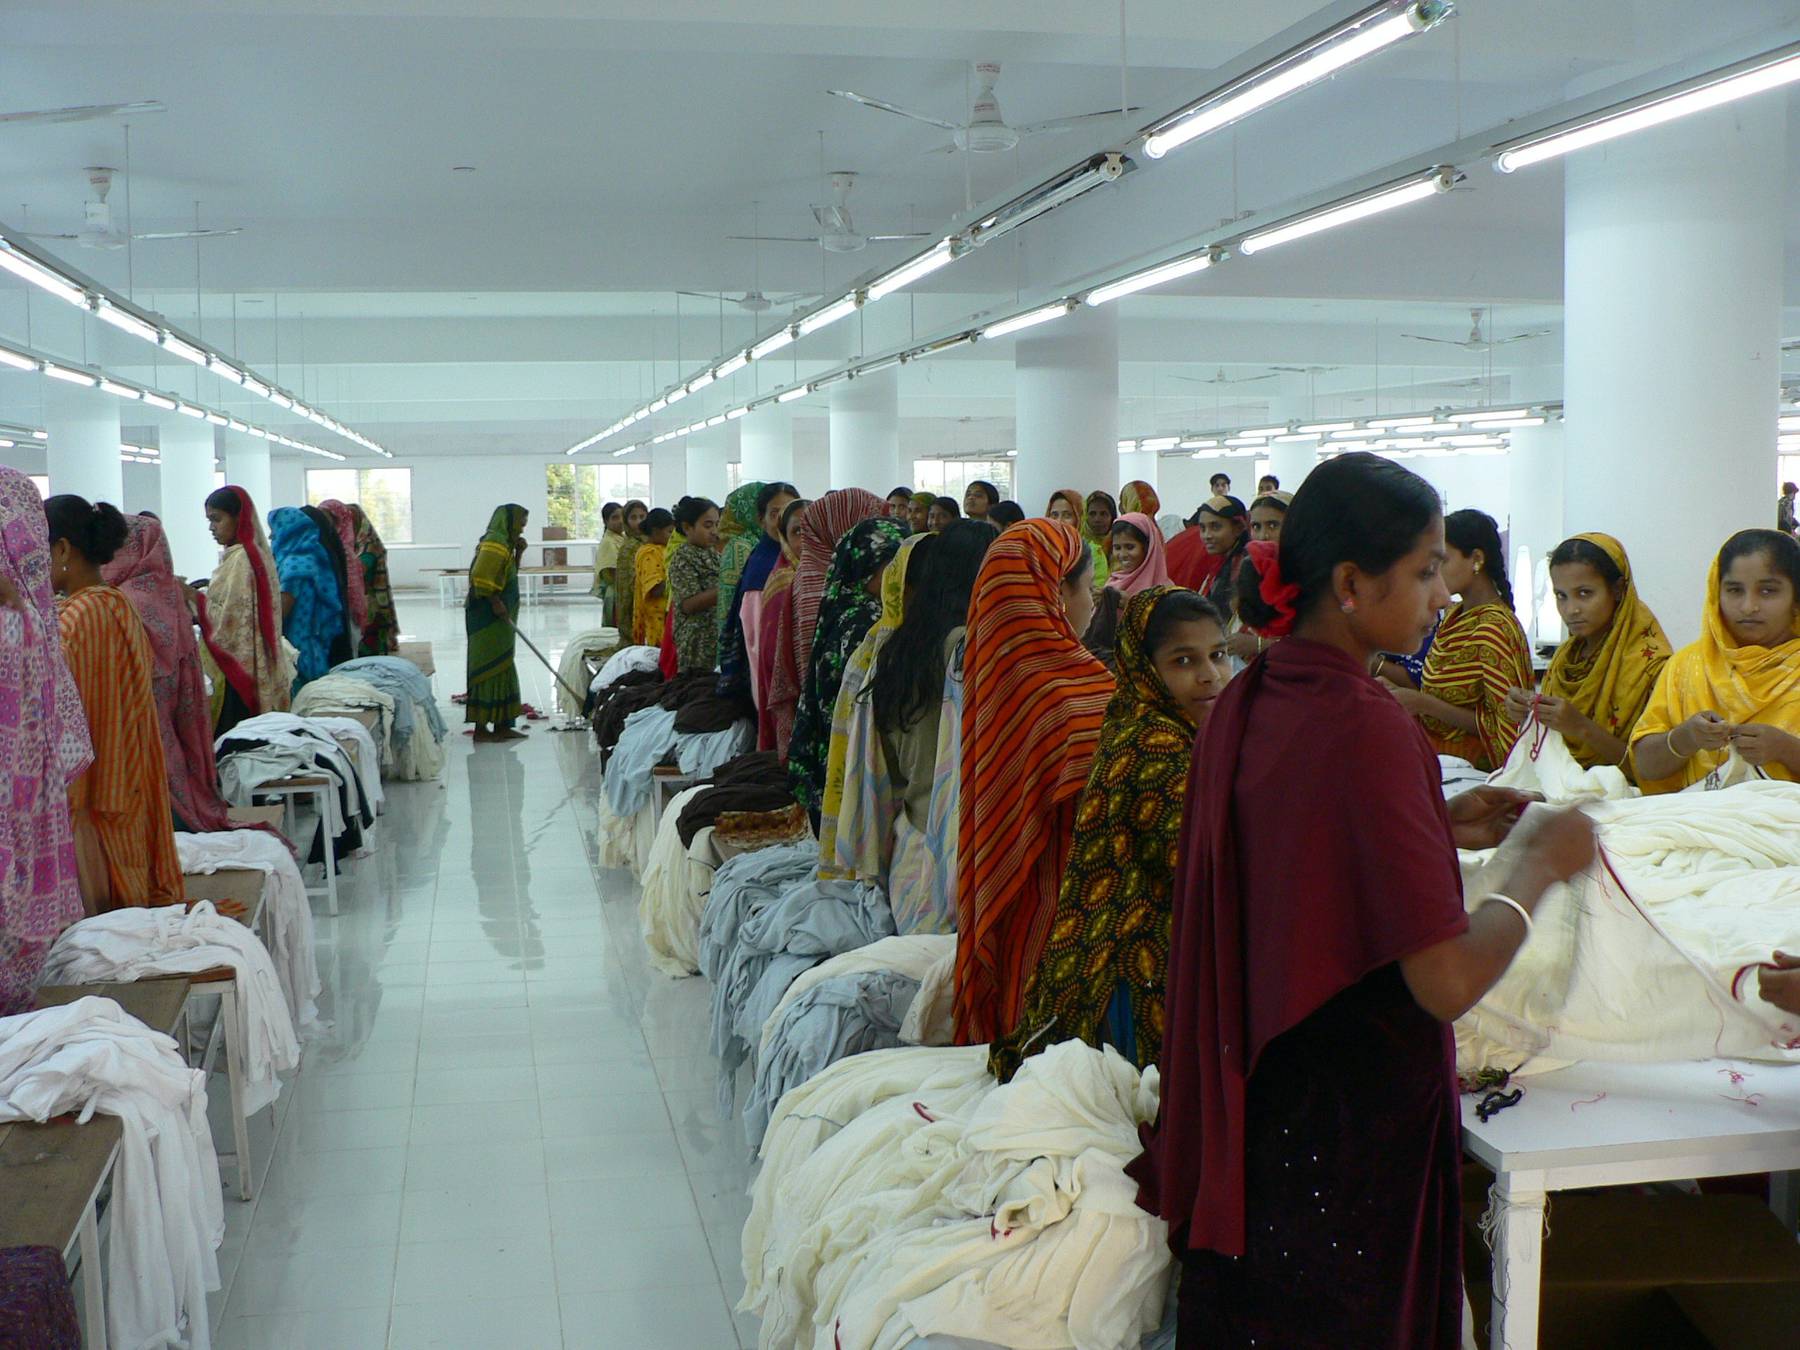 Garment workers in a textile factory in Dhaka, Bangladesh.